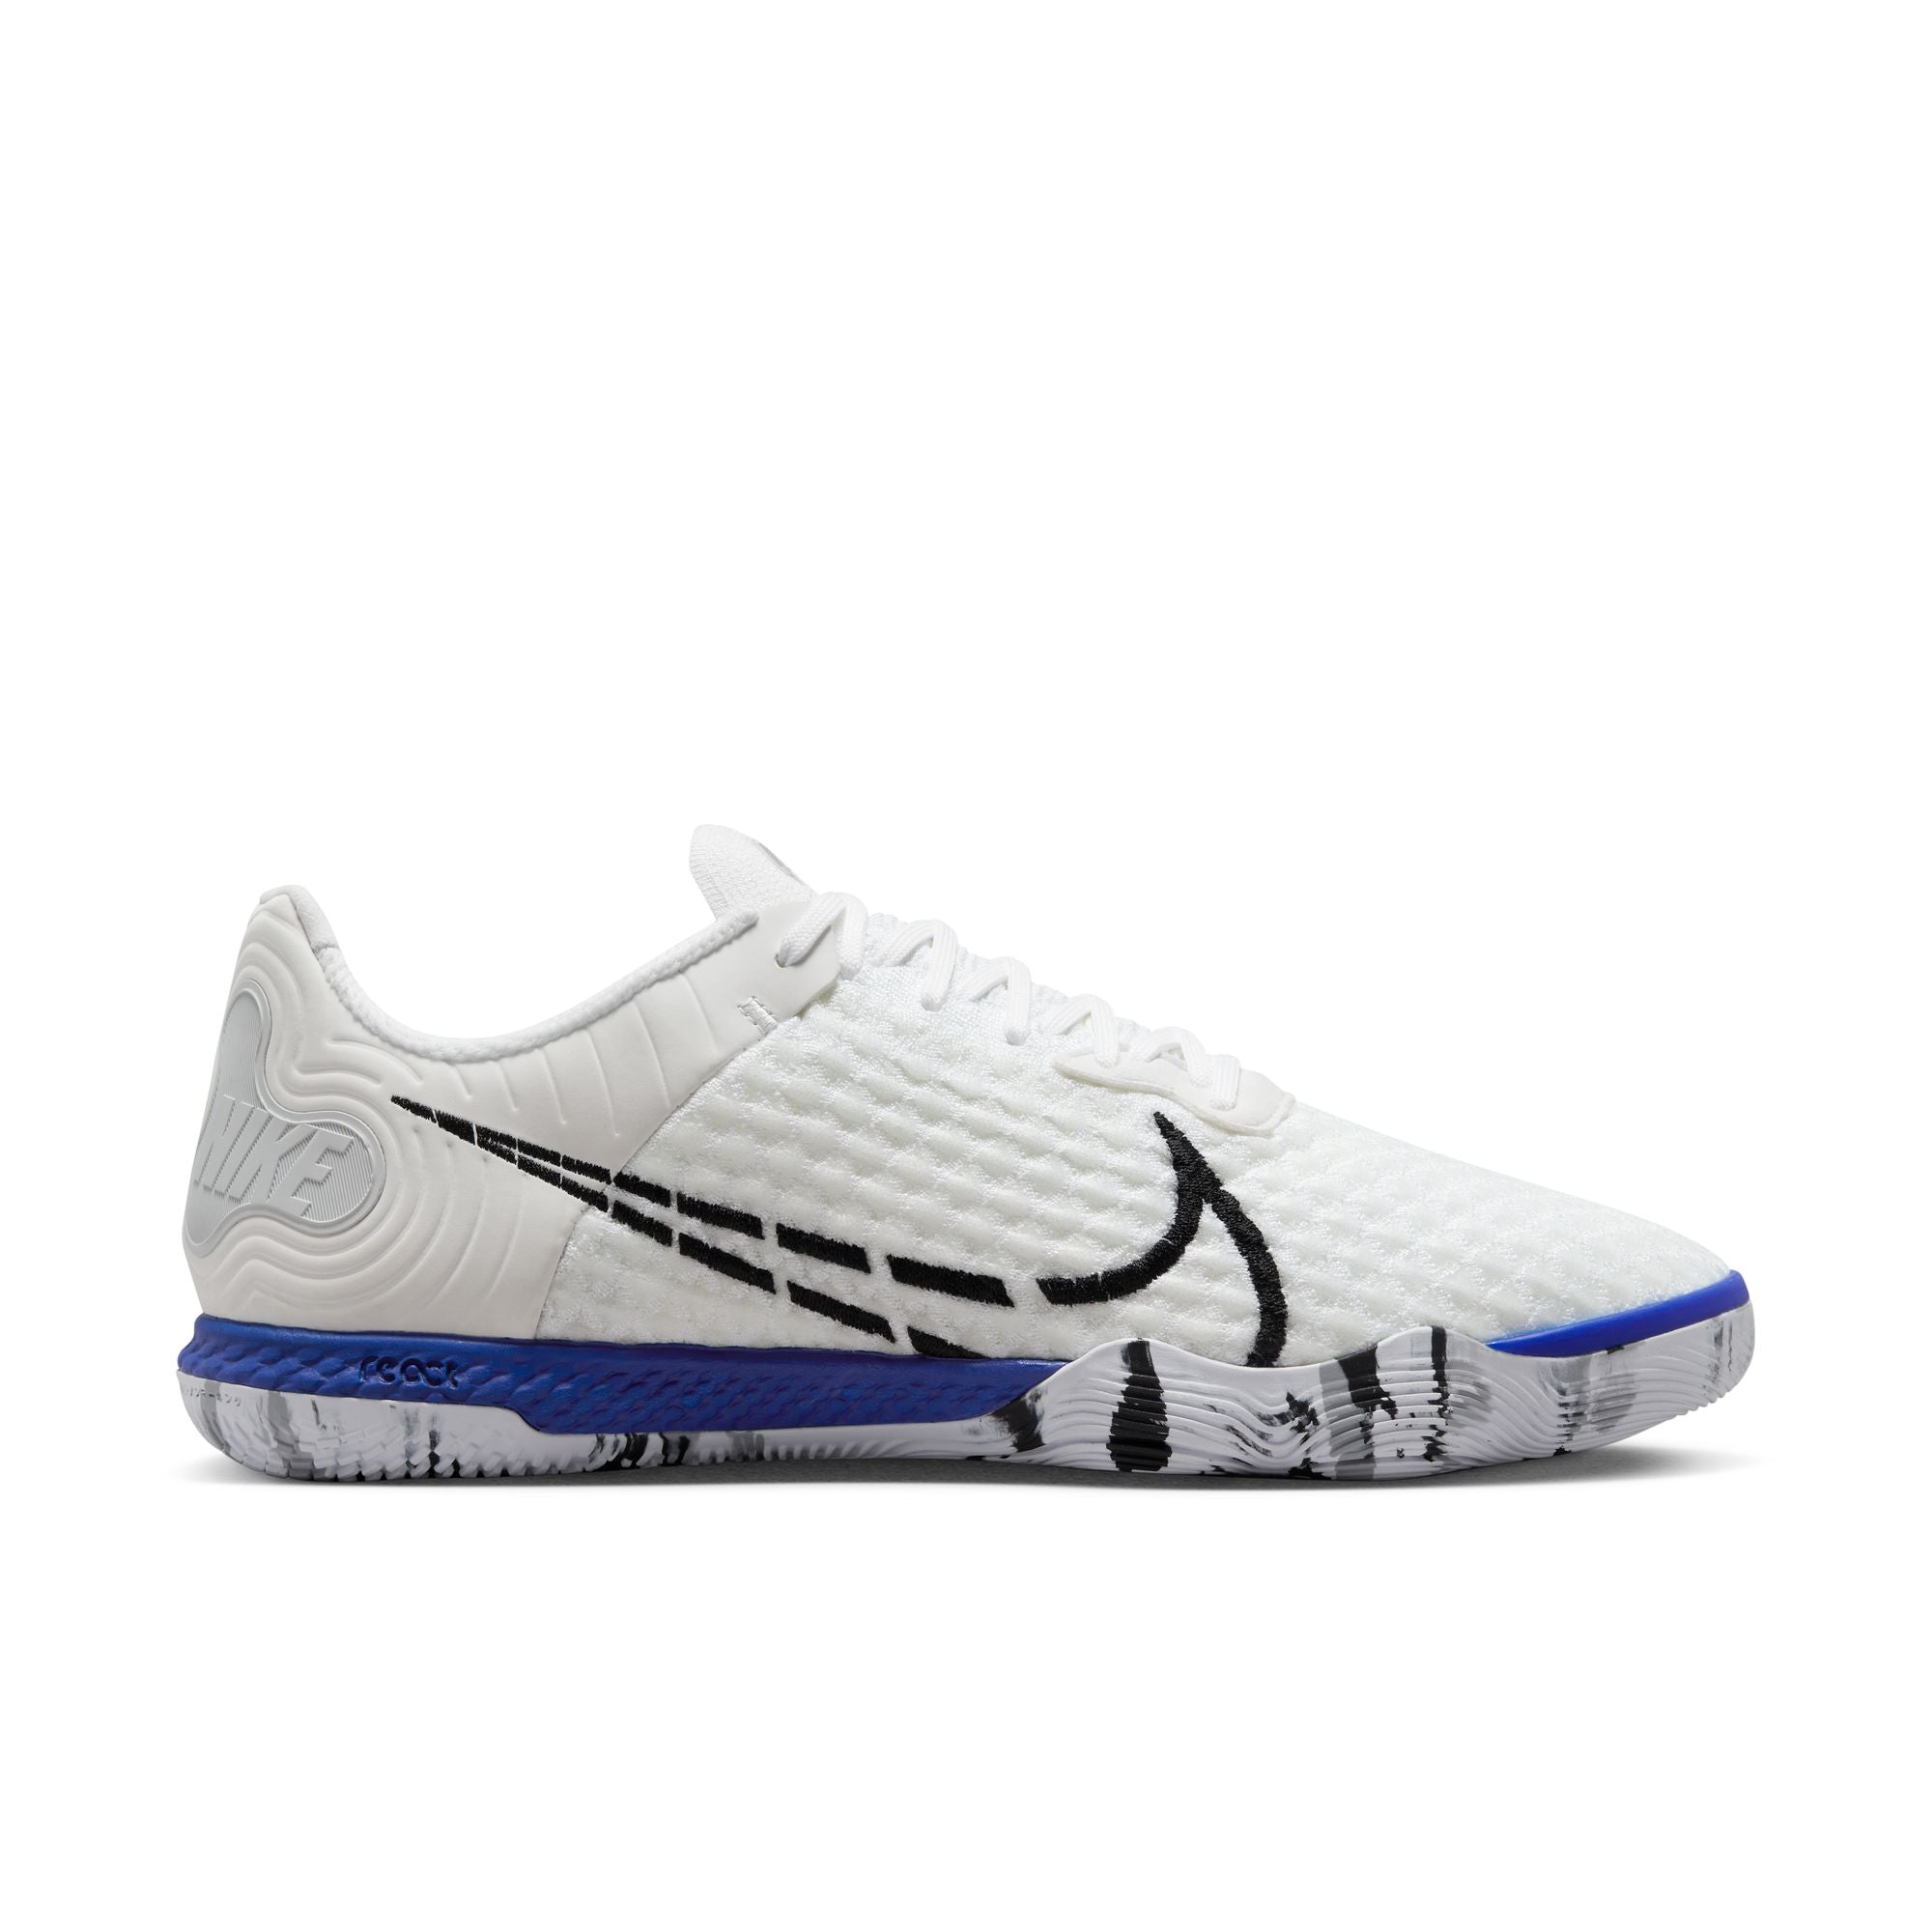 React Gato IN Indoor Soccer Shoes - White/Black/Blue/Green/Gray CT0550-104 – Soccer Zone USA